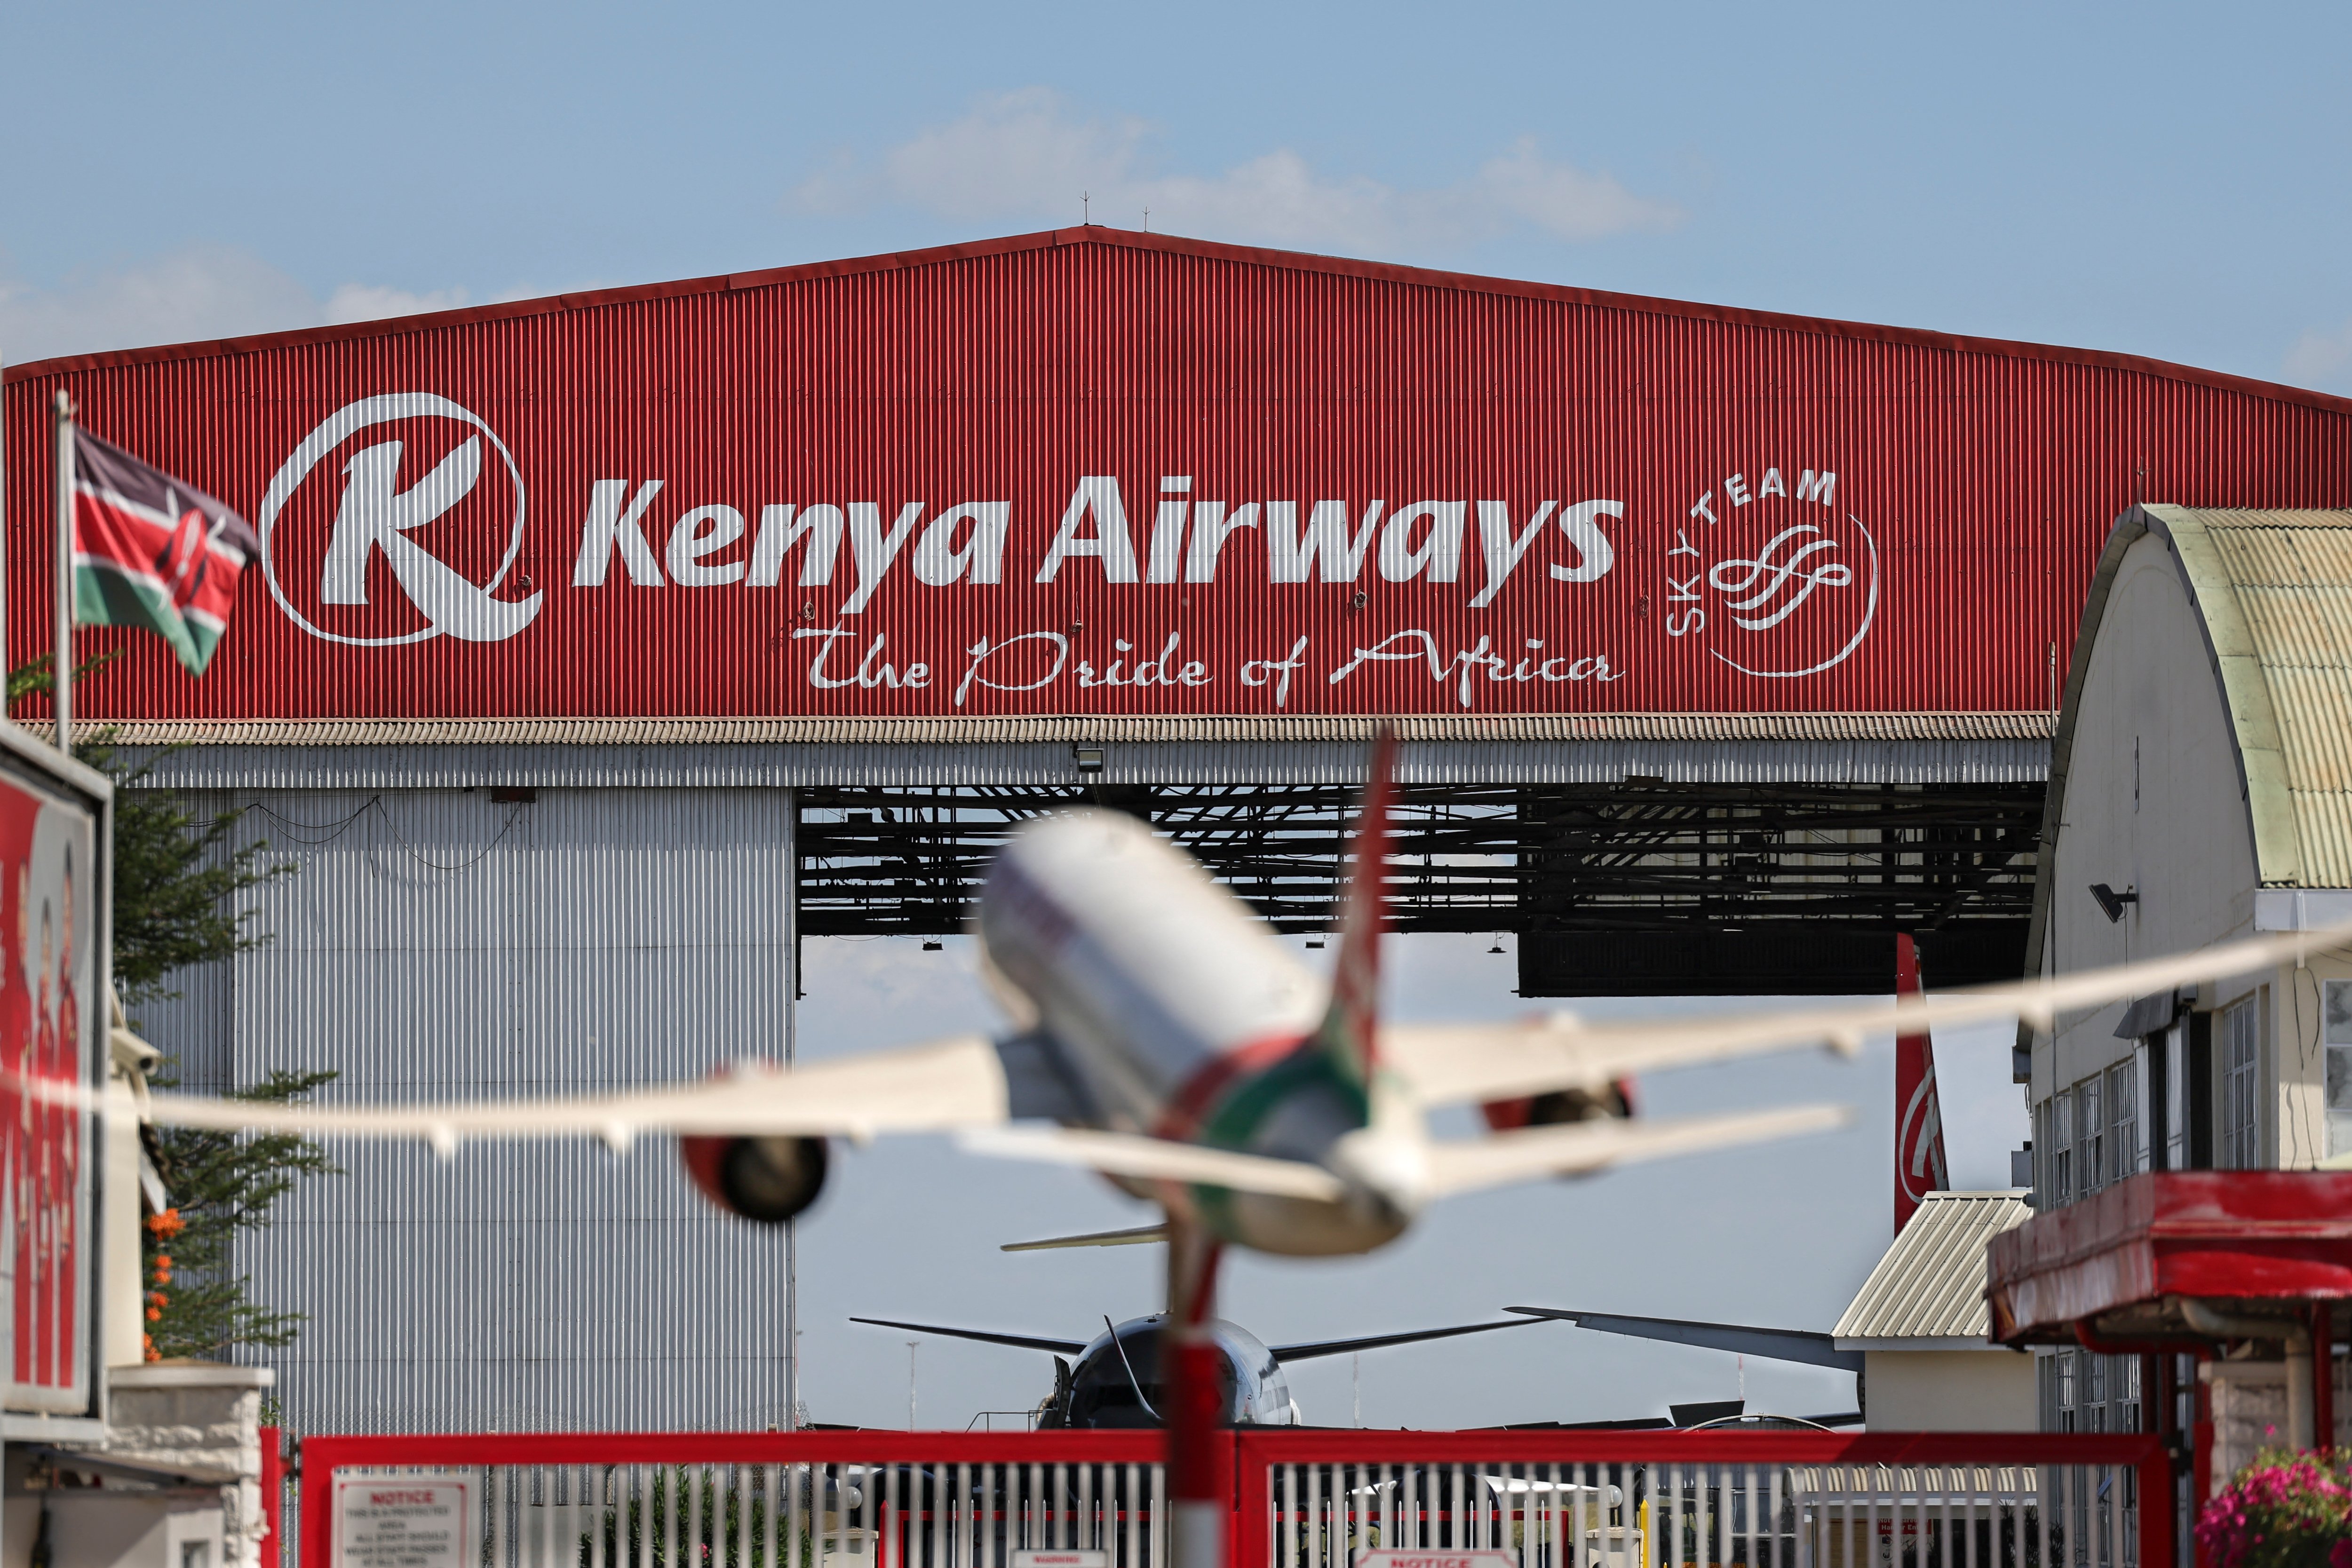 Kenya Airways propelled by first operating profit in years